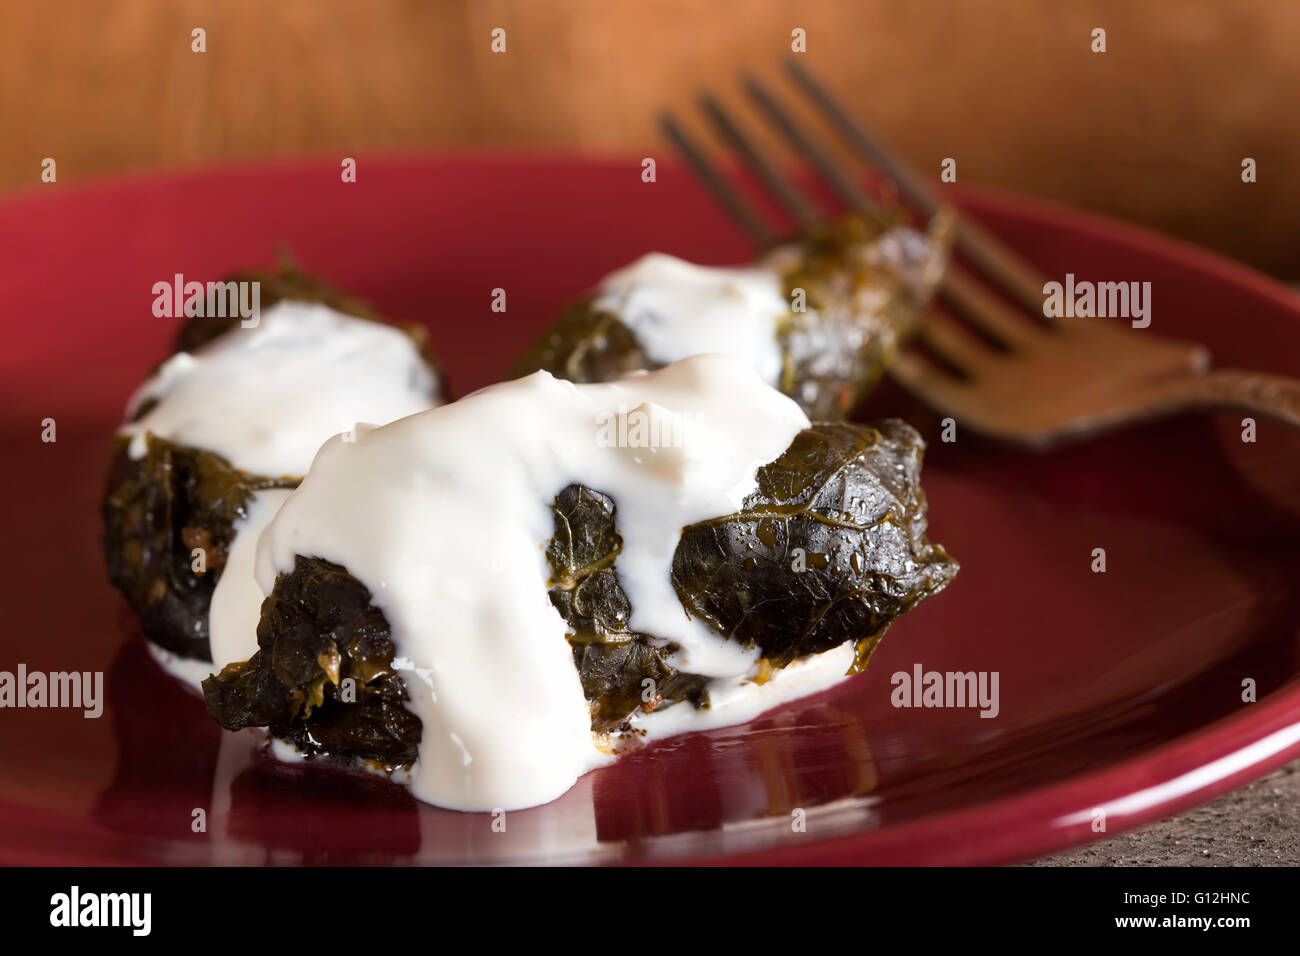 Stuffed cabbage rolls in grape leaves with sour cream on a red plate Stock Photo